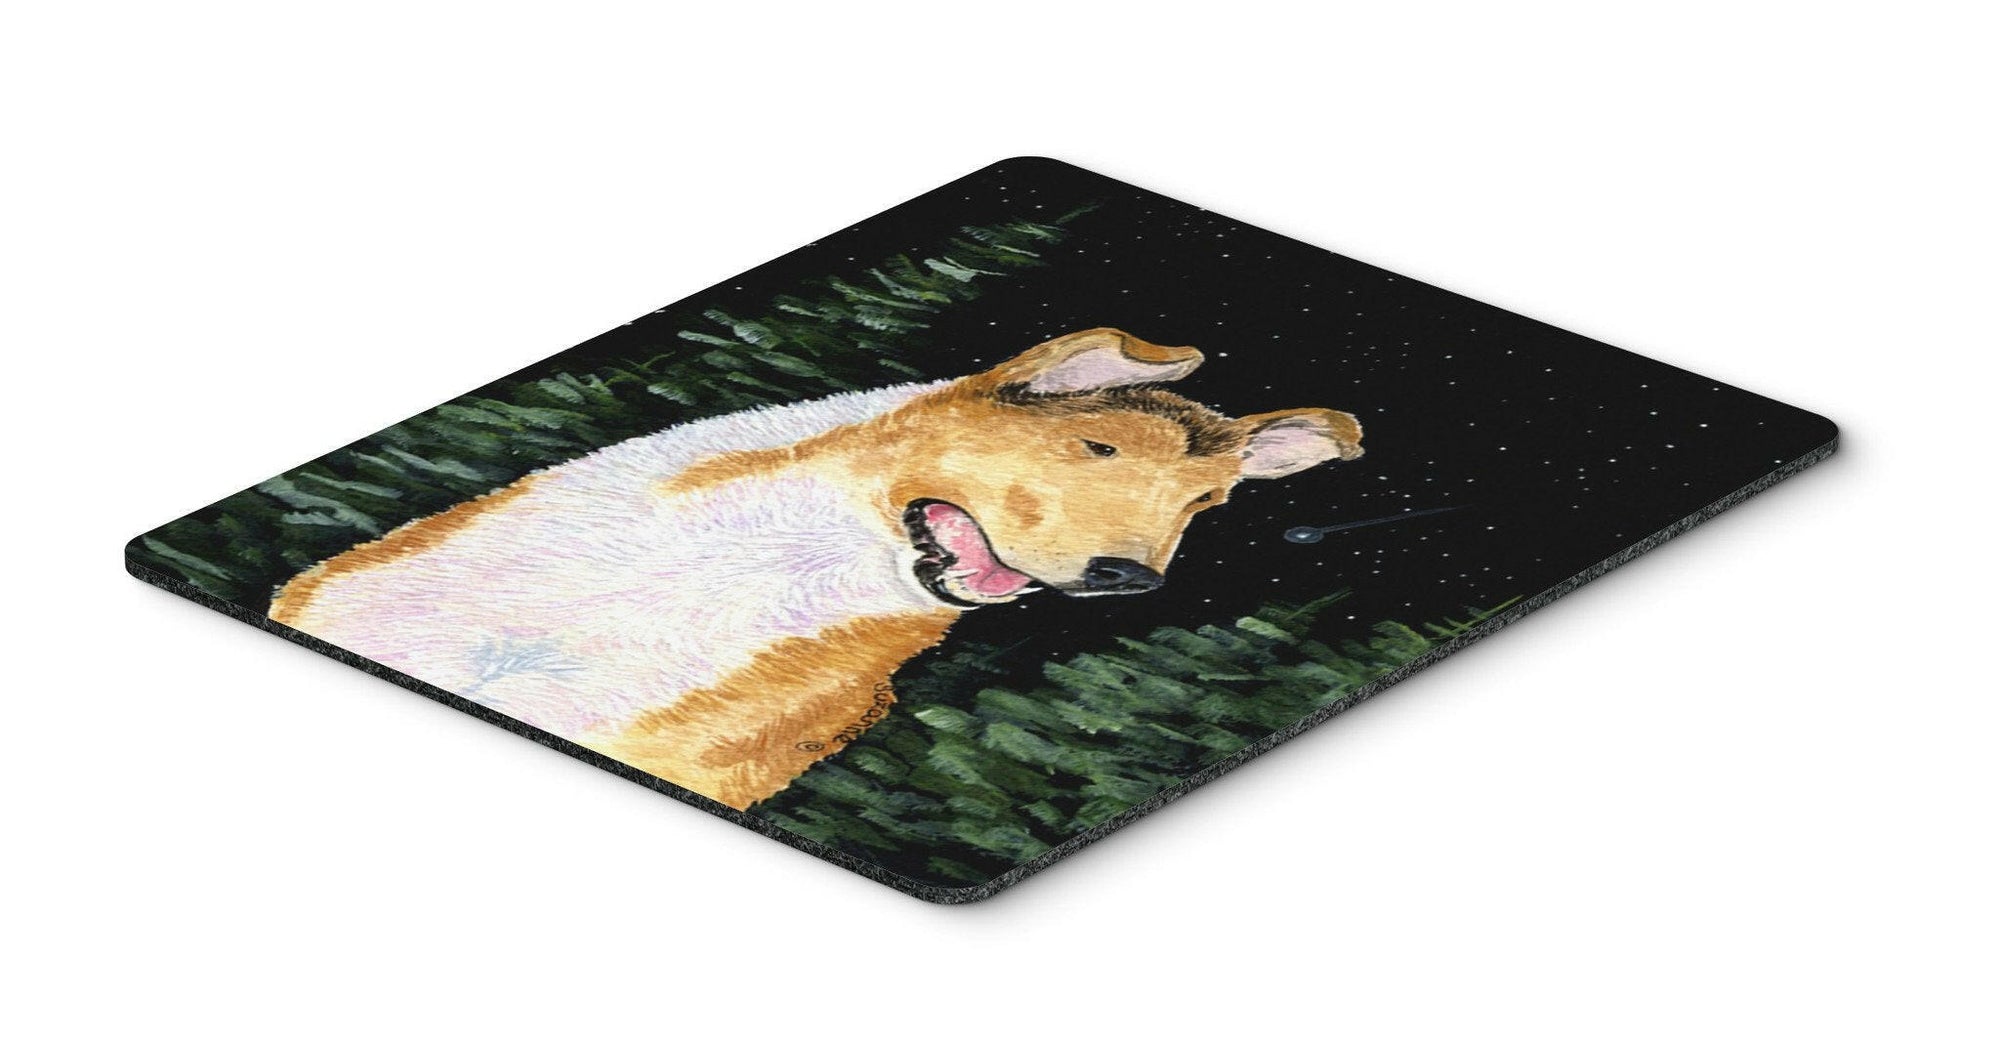 Starry Night Collie Smooth Mouse Pad / Hot Pad / Trivet by Caroline's Treasures